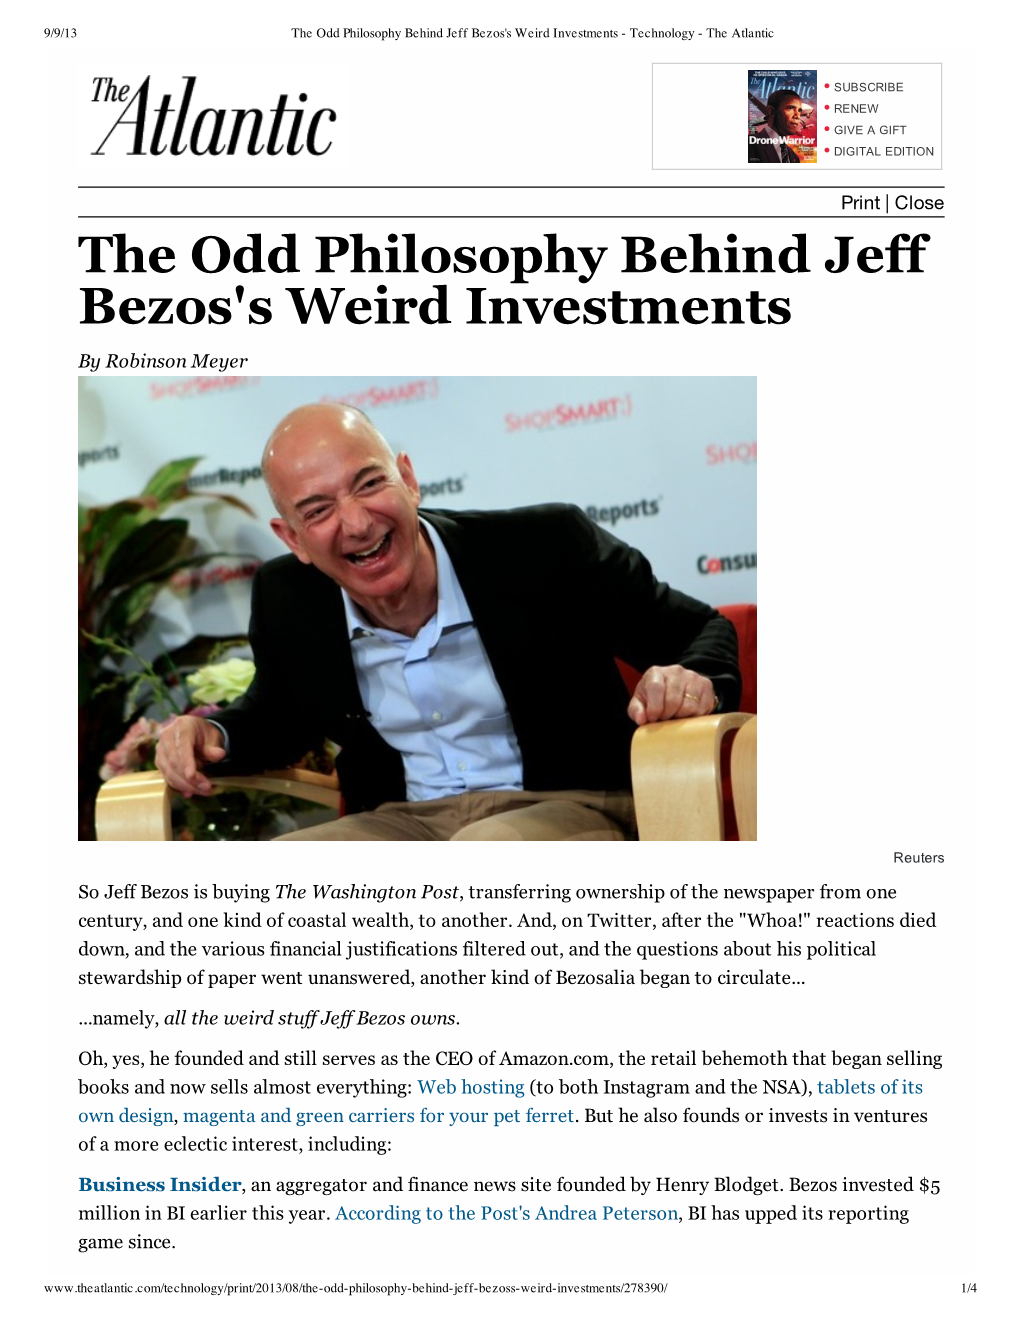 The Odd Philosophy Behind Jeff Bezos's Weird Investments - Technology - the Atlantic